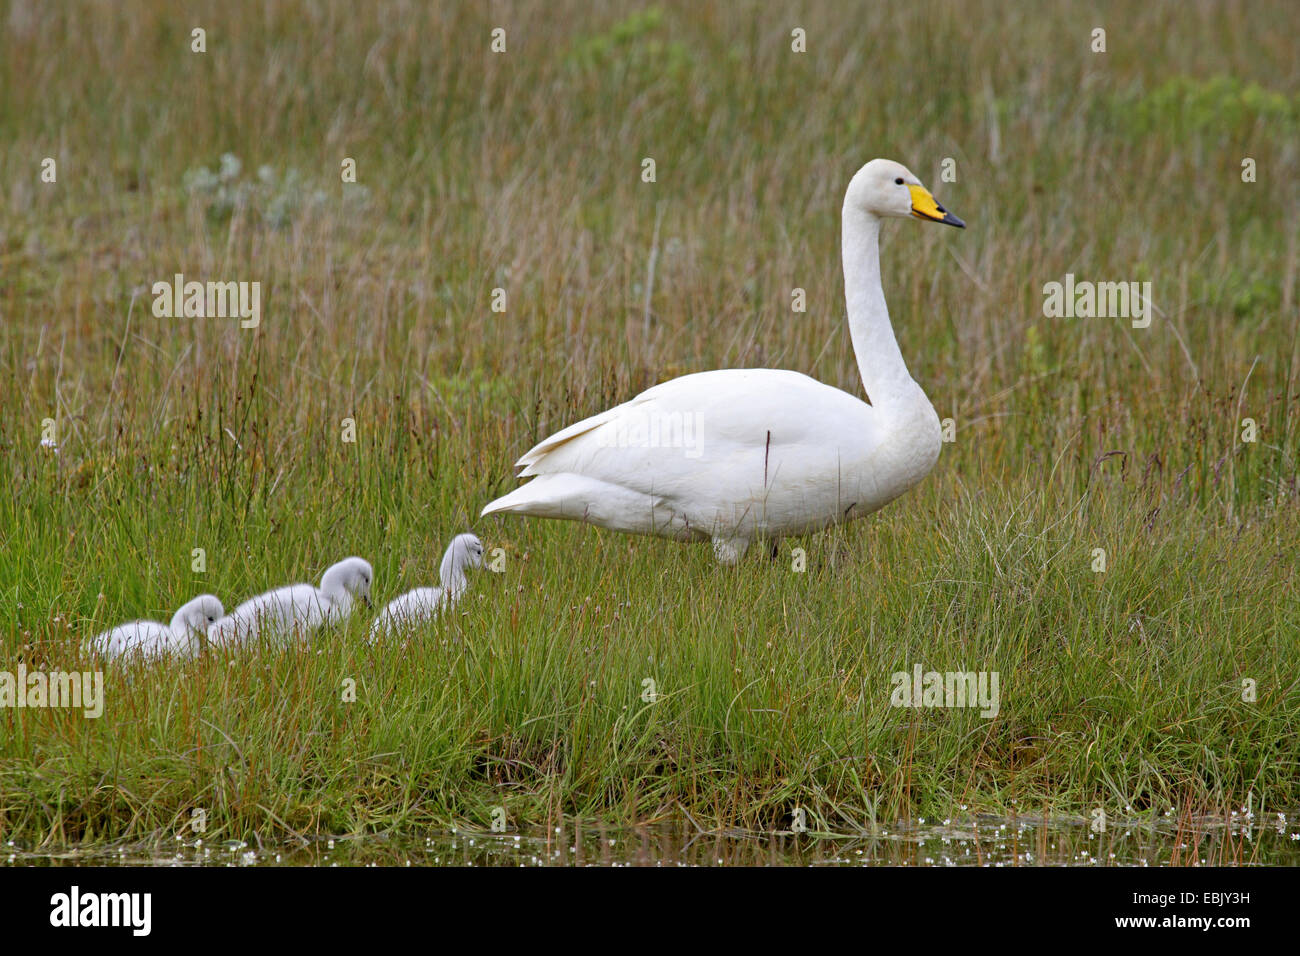 whooper swan (Cygnus cygnus), parent with squeakers walking through grass, Iceland Stock Photo